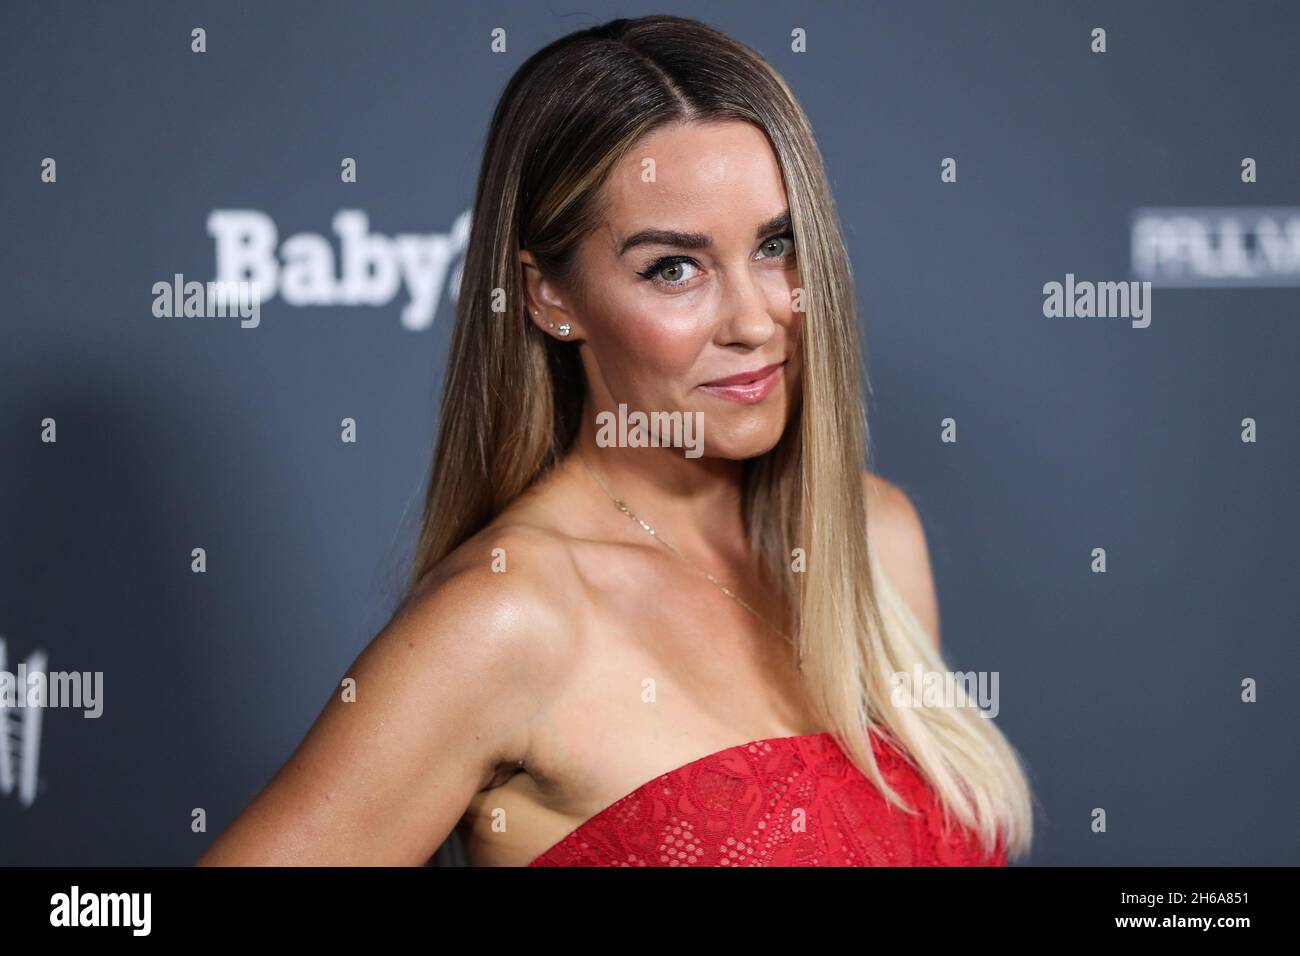 WEST HOLLYWOOD, CALIFORNIA - NOVEMBER 13: Lauren Conrad attends the  Baby2Baby 10-Year Gala Presented By Paul Mitchell at the Pacific Design  Center on November 13, 2021 in West Hollywood, California. Photo:  CraSH/imageSPACE